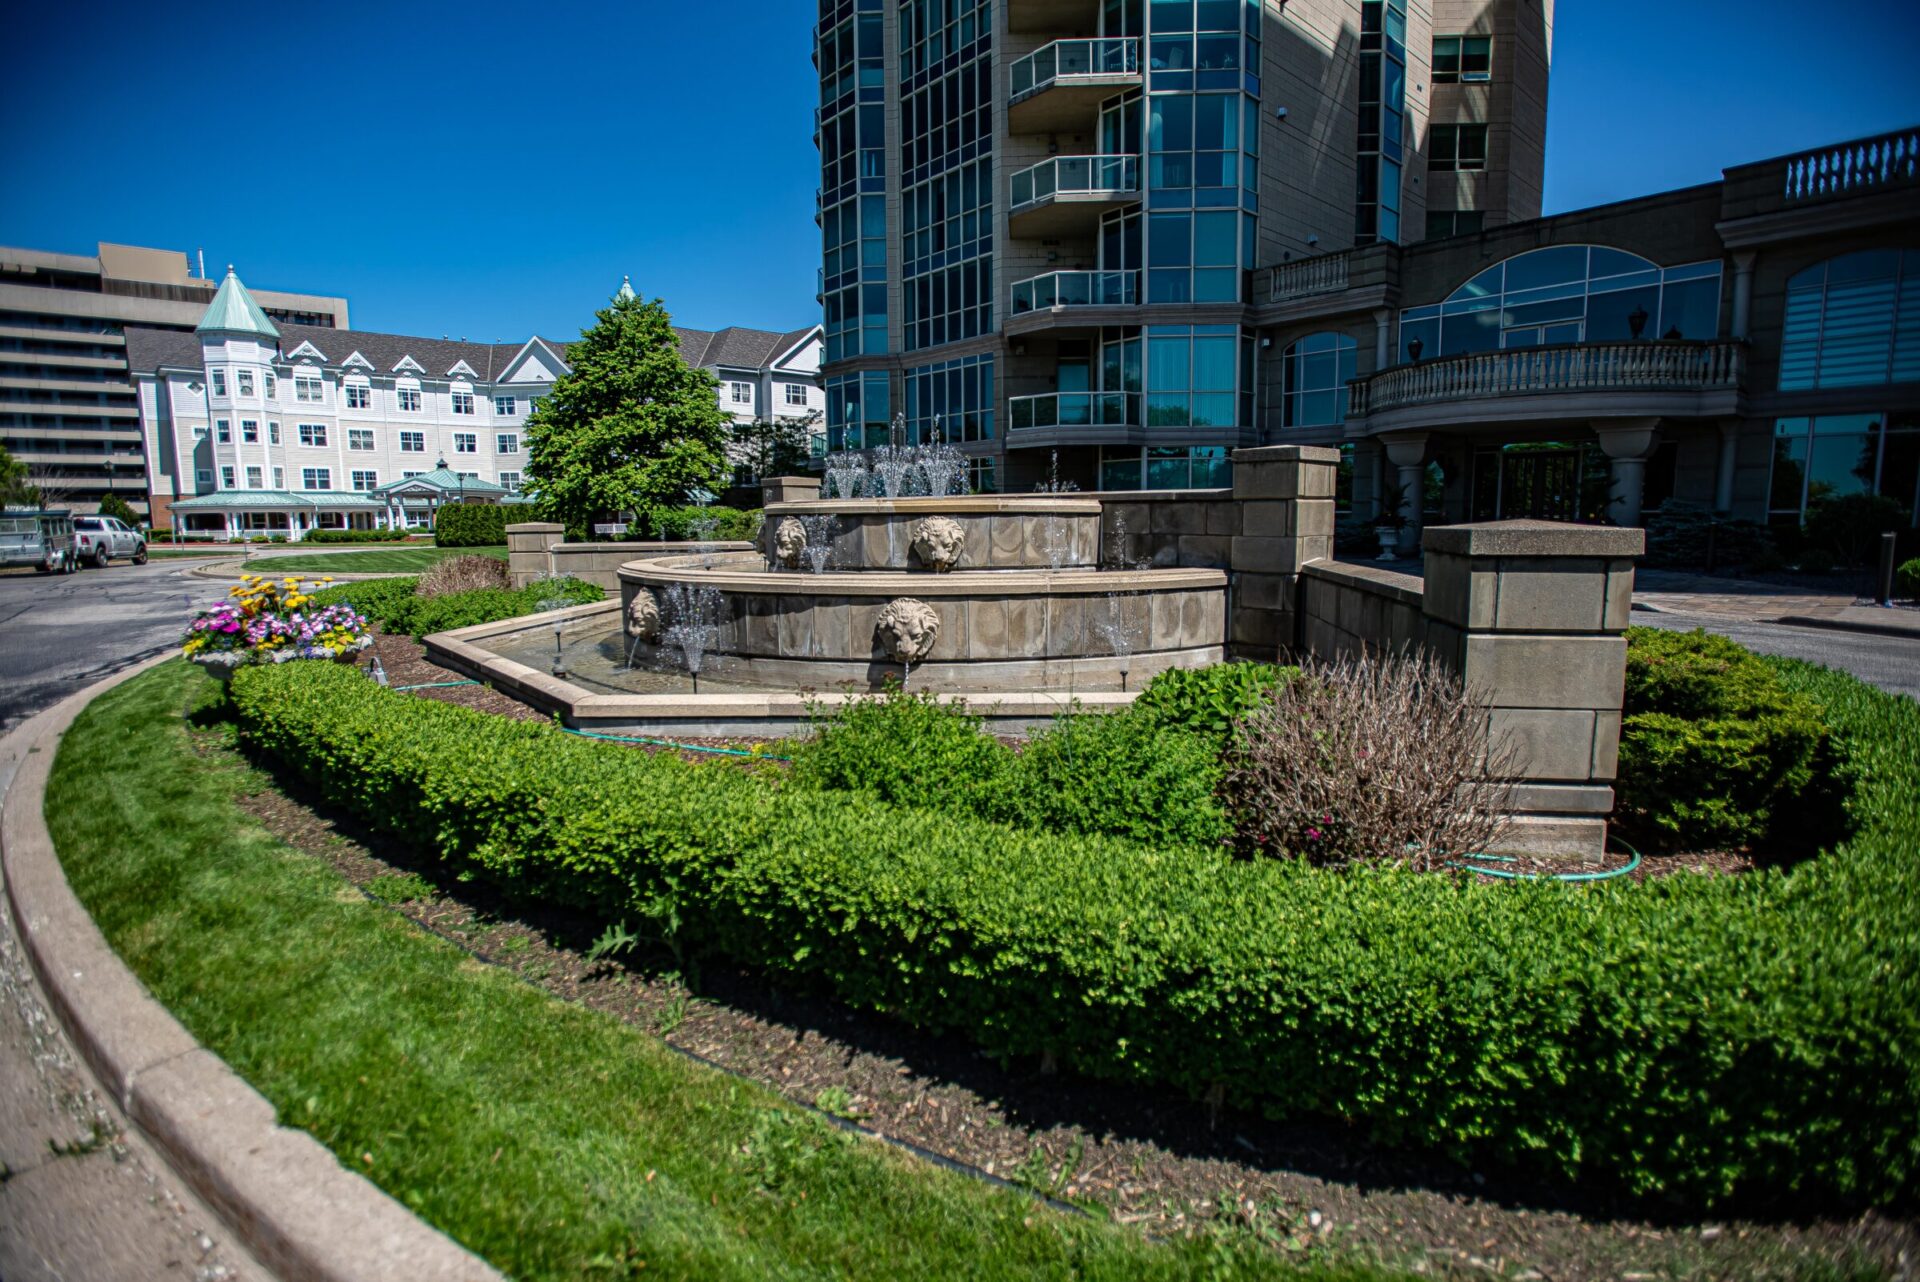 The image shows a vibrant outdoor setting with a fountain, manicured hedges, and a variety of buildings under a clear blue sky.